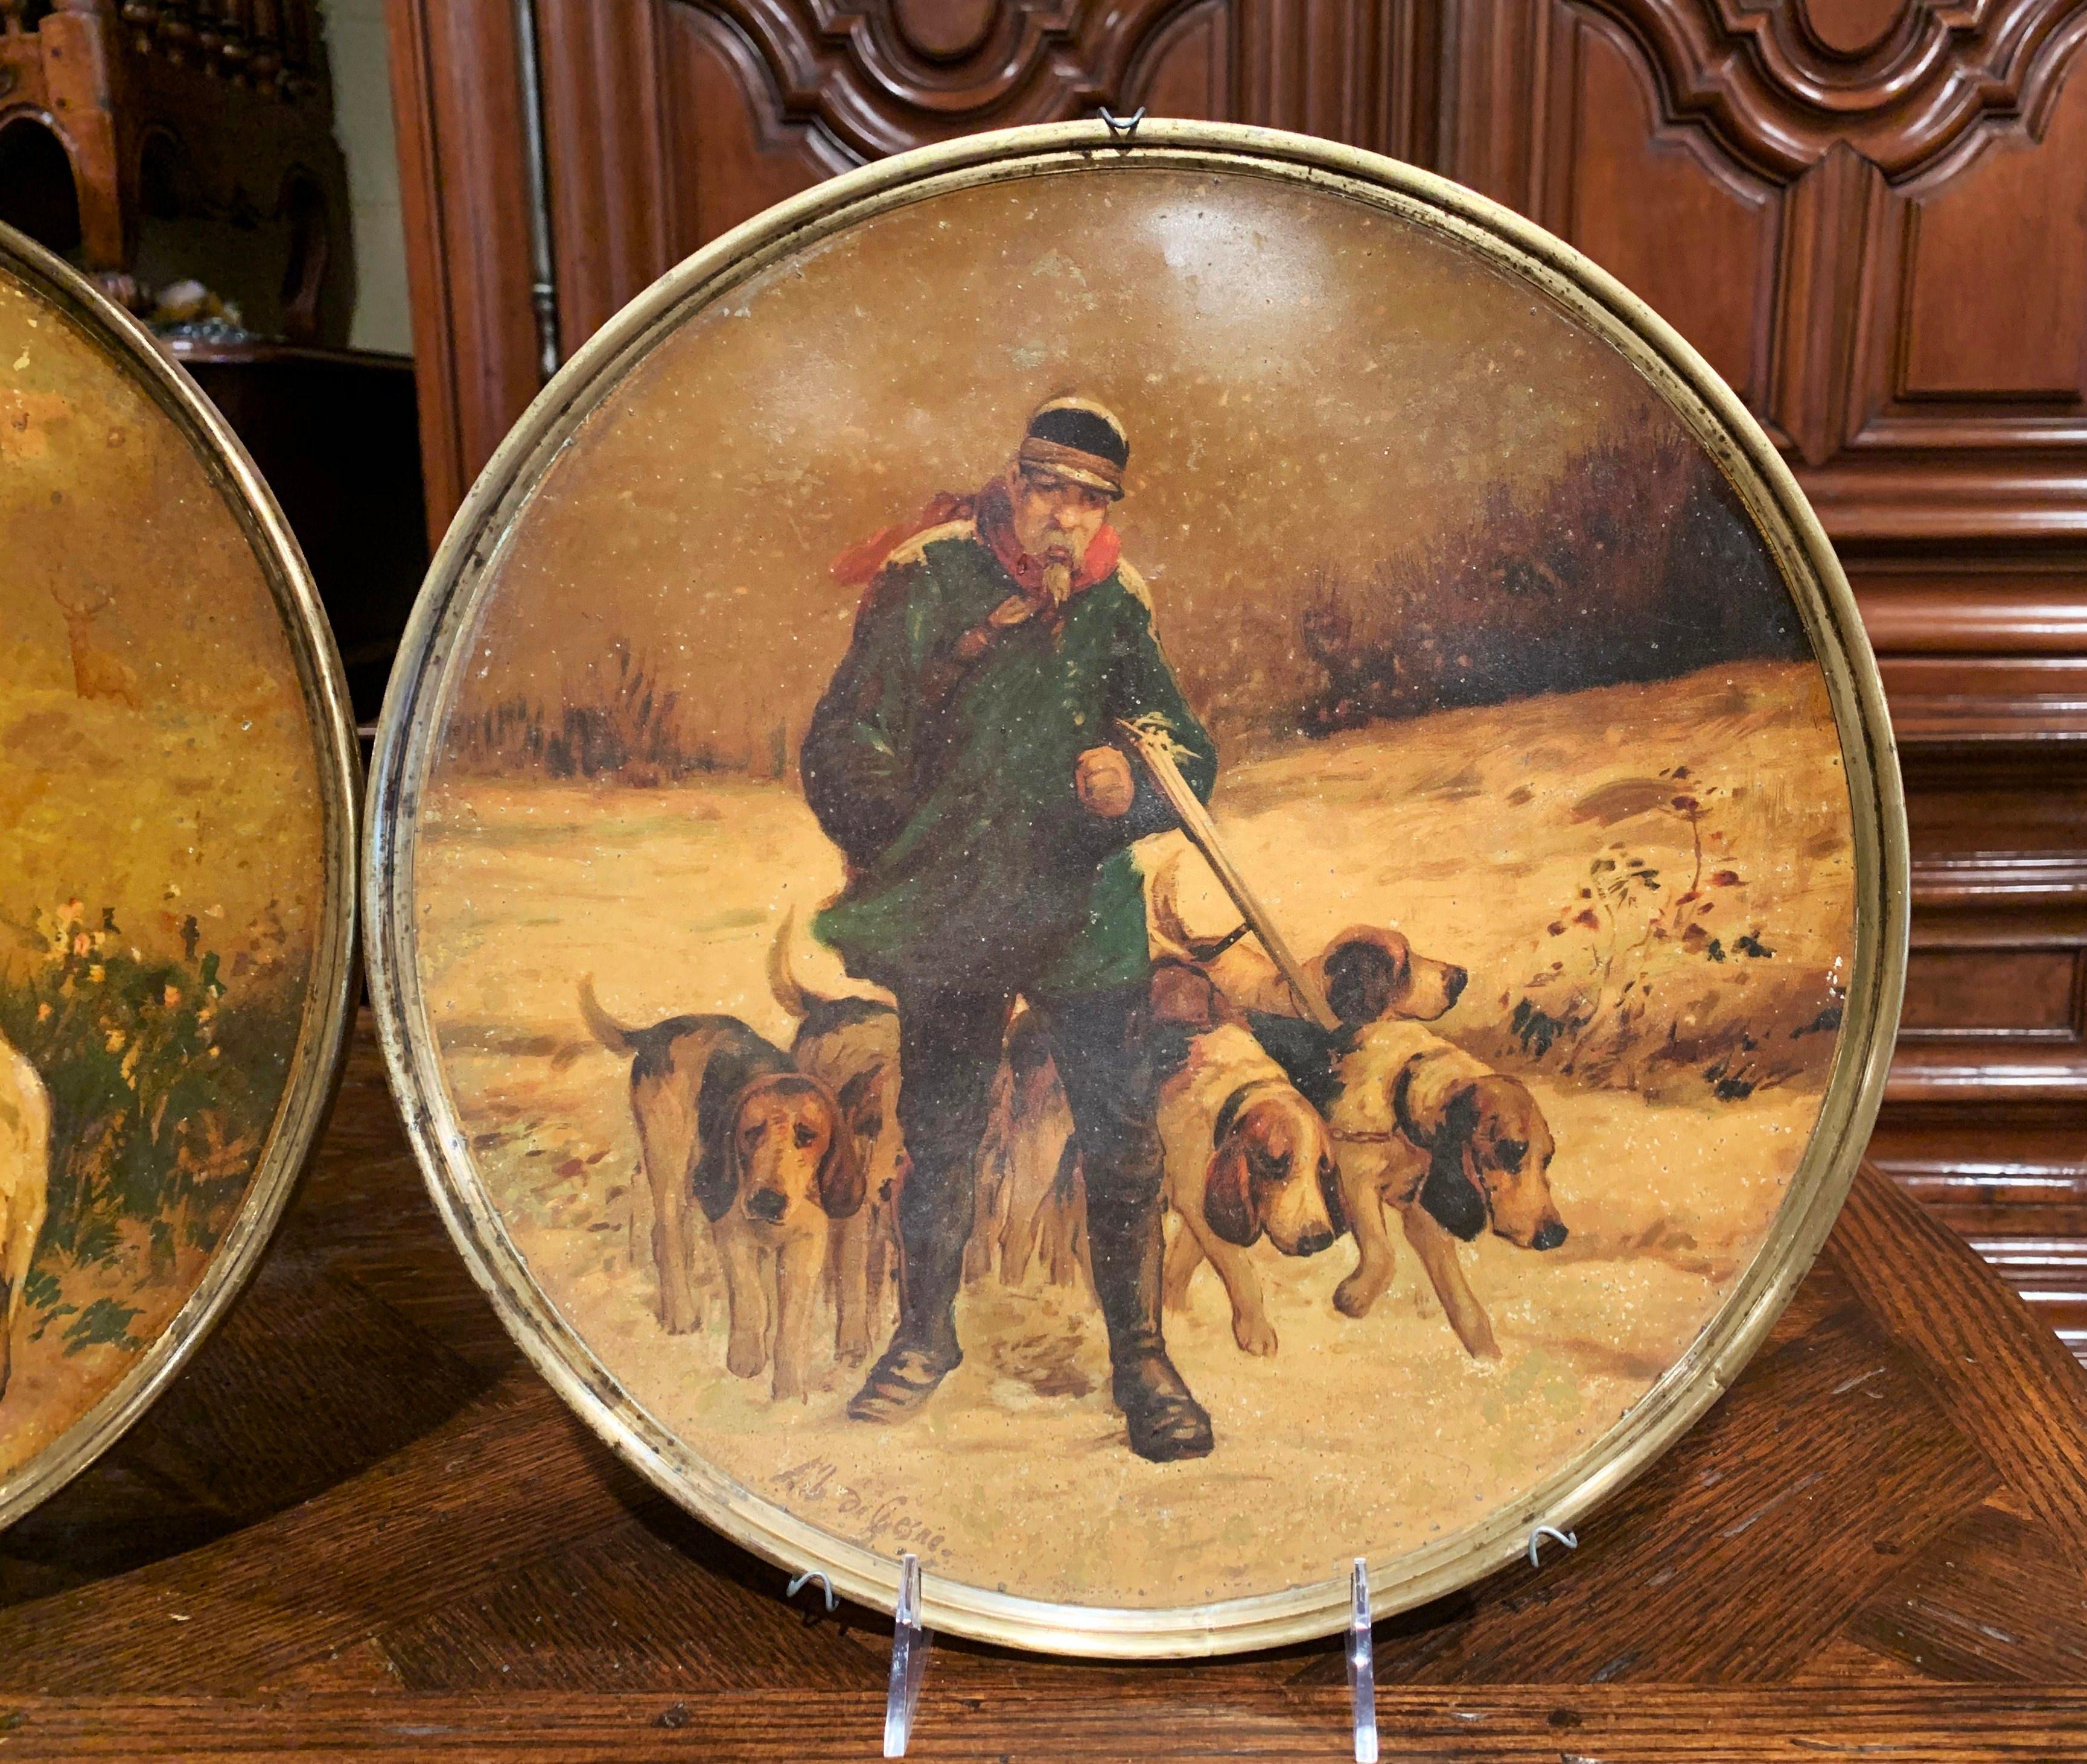 Hand-Painted 19th Century French Painted Hunt Scene Tole Wall Plates Signed A. de Gesne, Pair For Sale